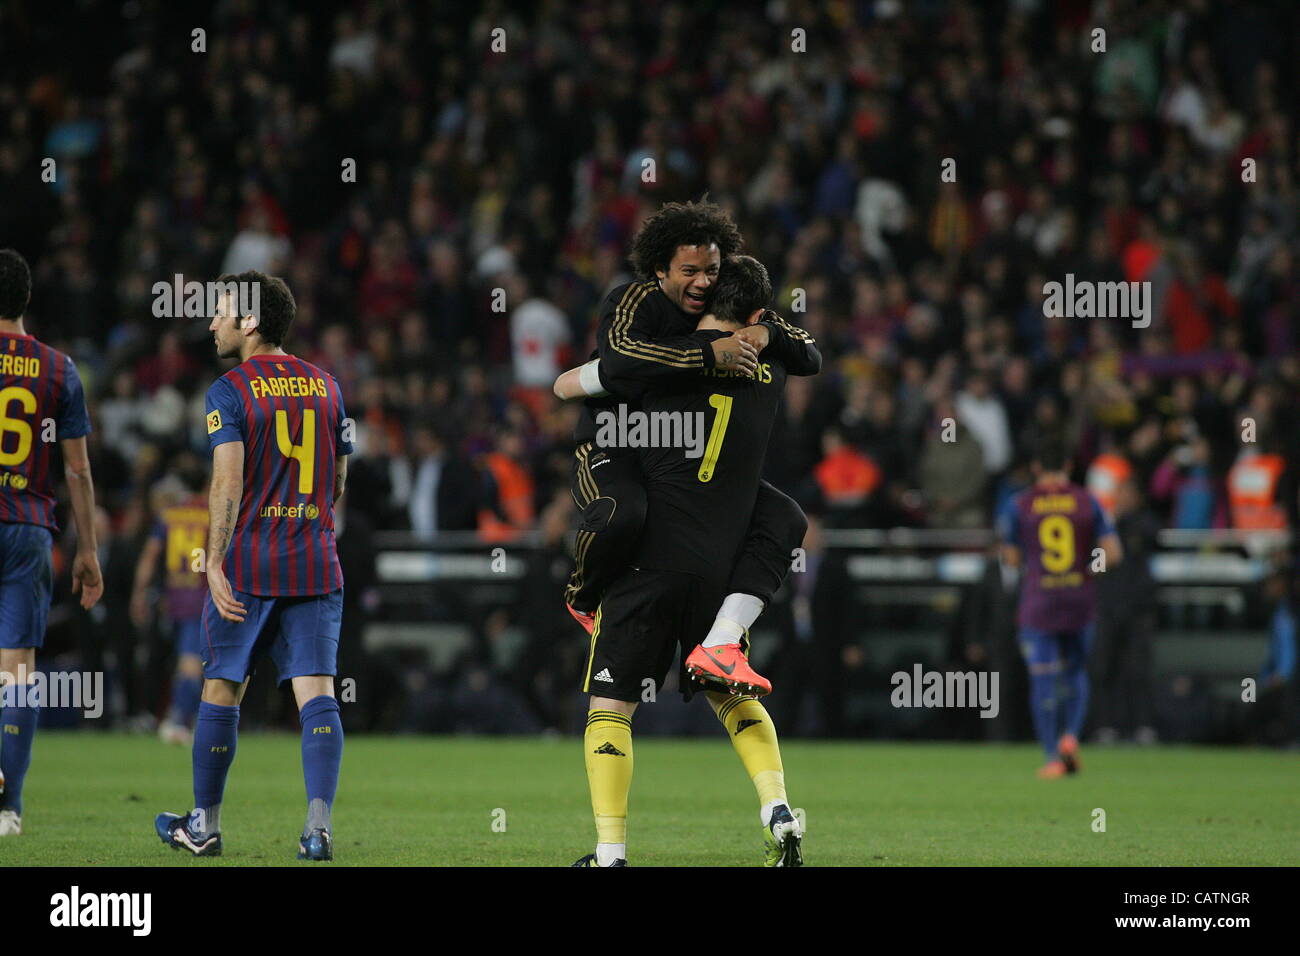 21.04.2012 Barcelona, SPAIN - La Liga match played between F.C. Barcelona vs Real Madrid (1-2) at Nou Camp stadium. the picture shows Iker Casillas (spanish goalkeeper of Real Madrid) and  Marcelo Vieira (Brazilian defender of Real Madrid) celebrating his team's victory Stock Photo